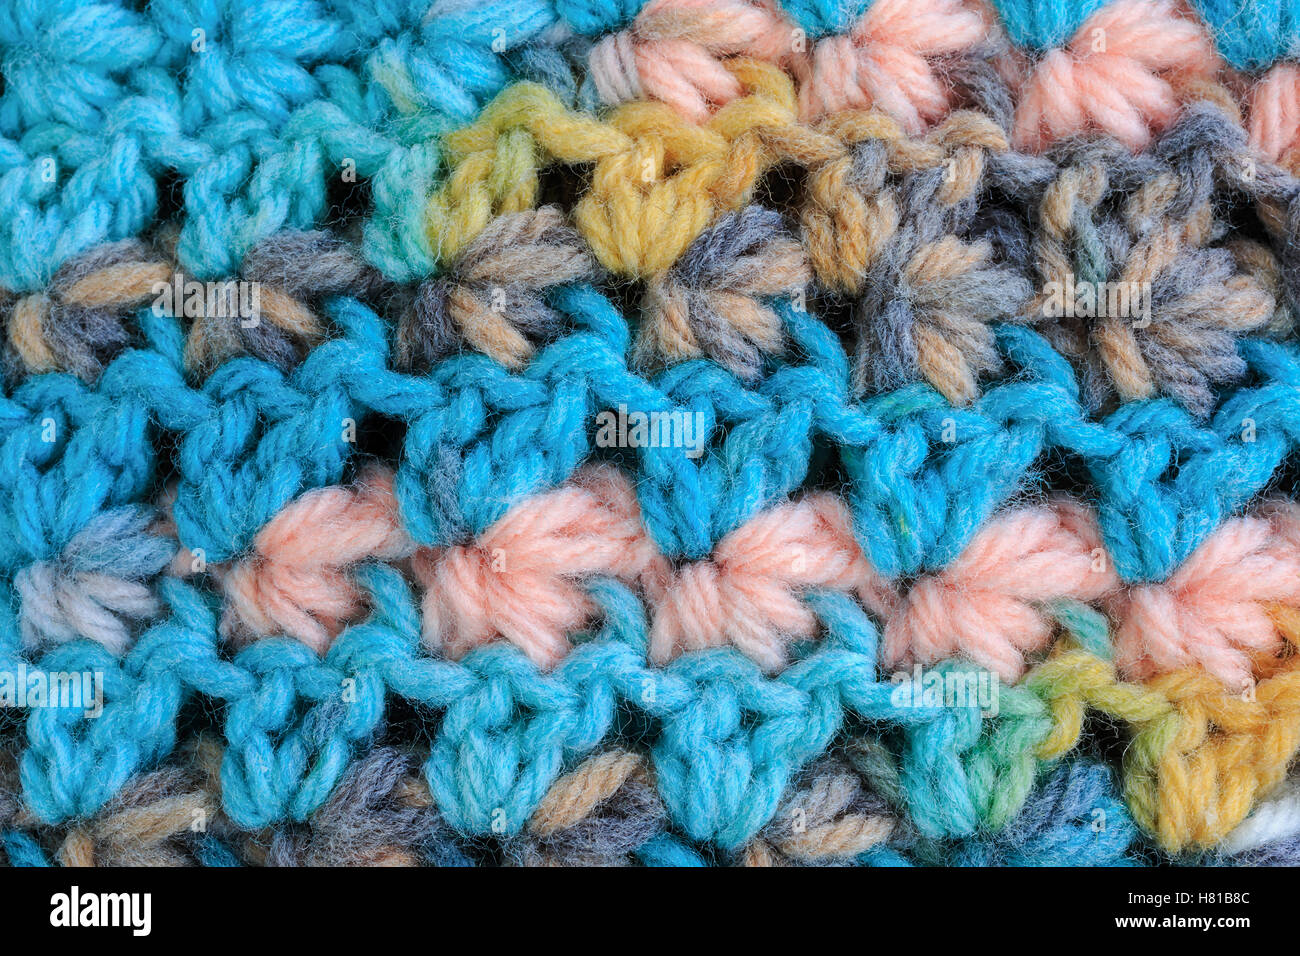 Detail of some crochet fabric showing rows of the shell stitch in a baby sweater. Stock Photo